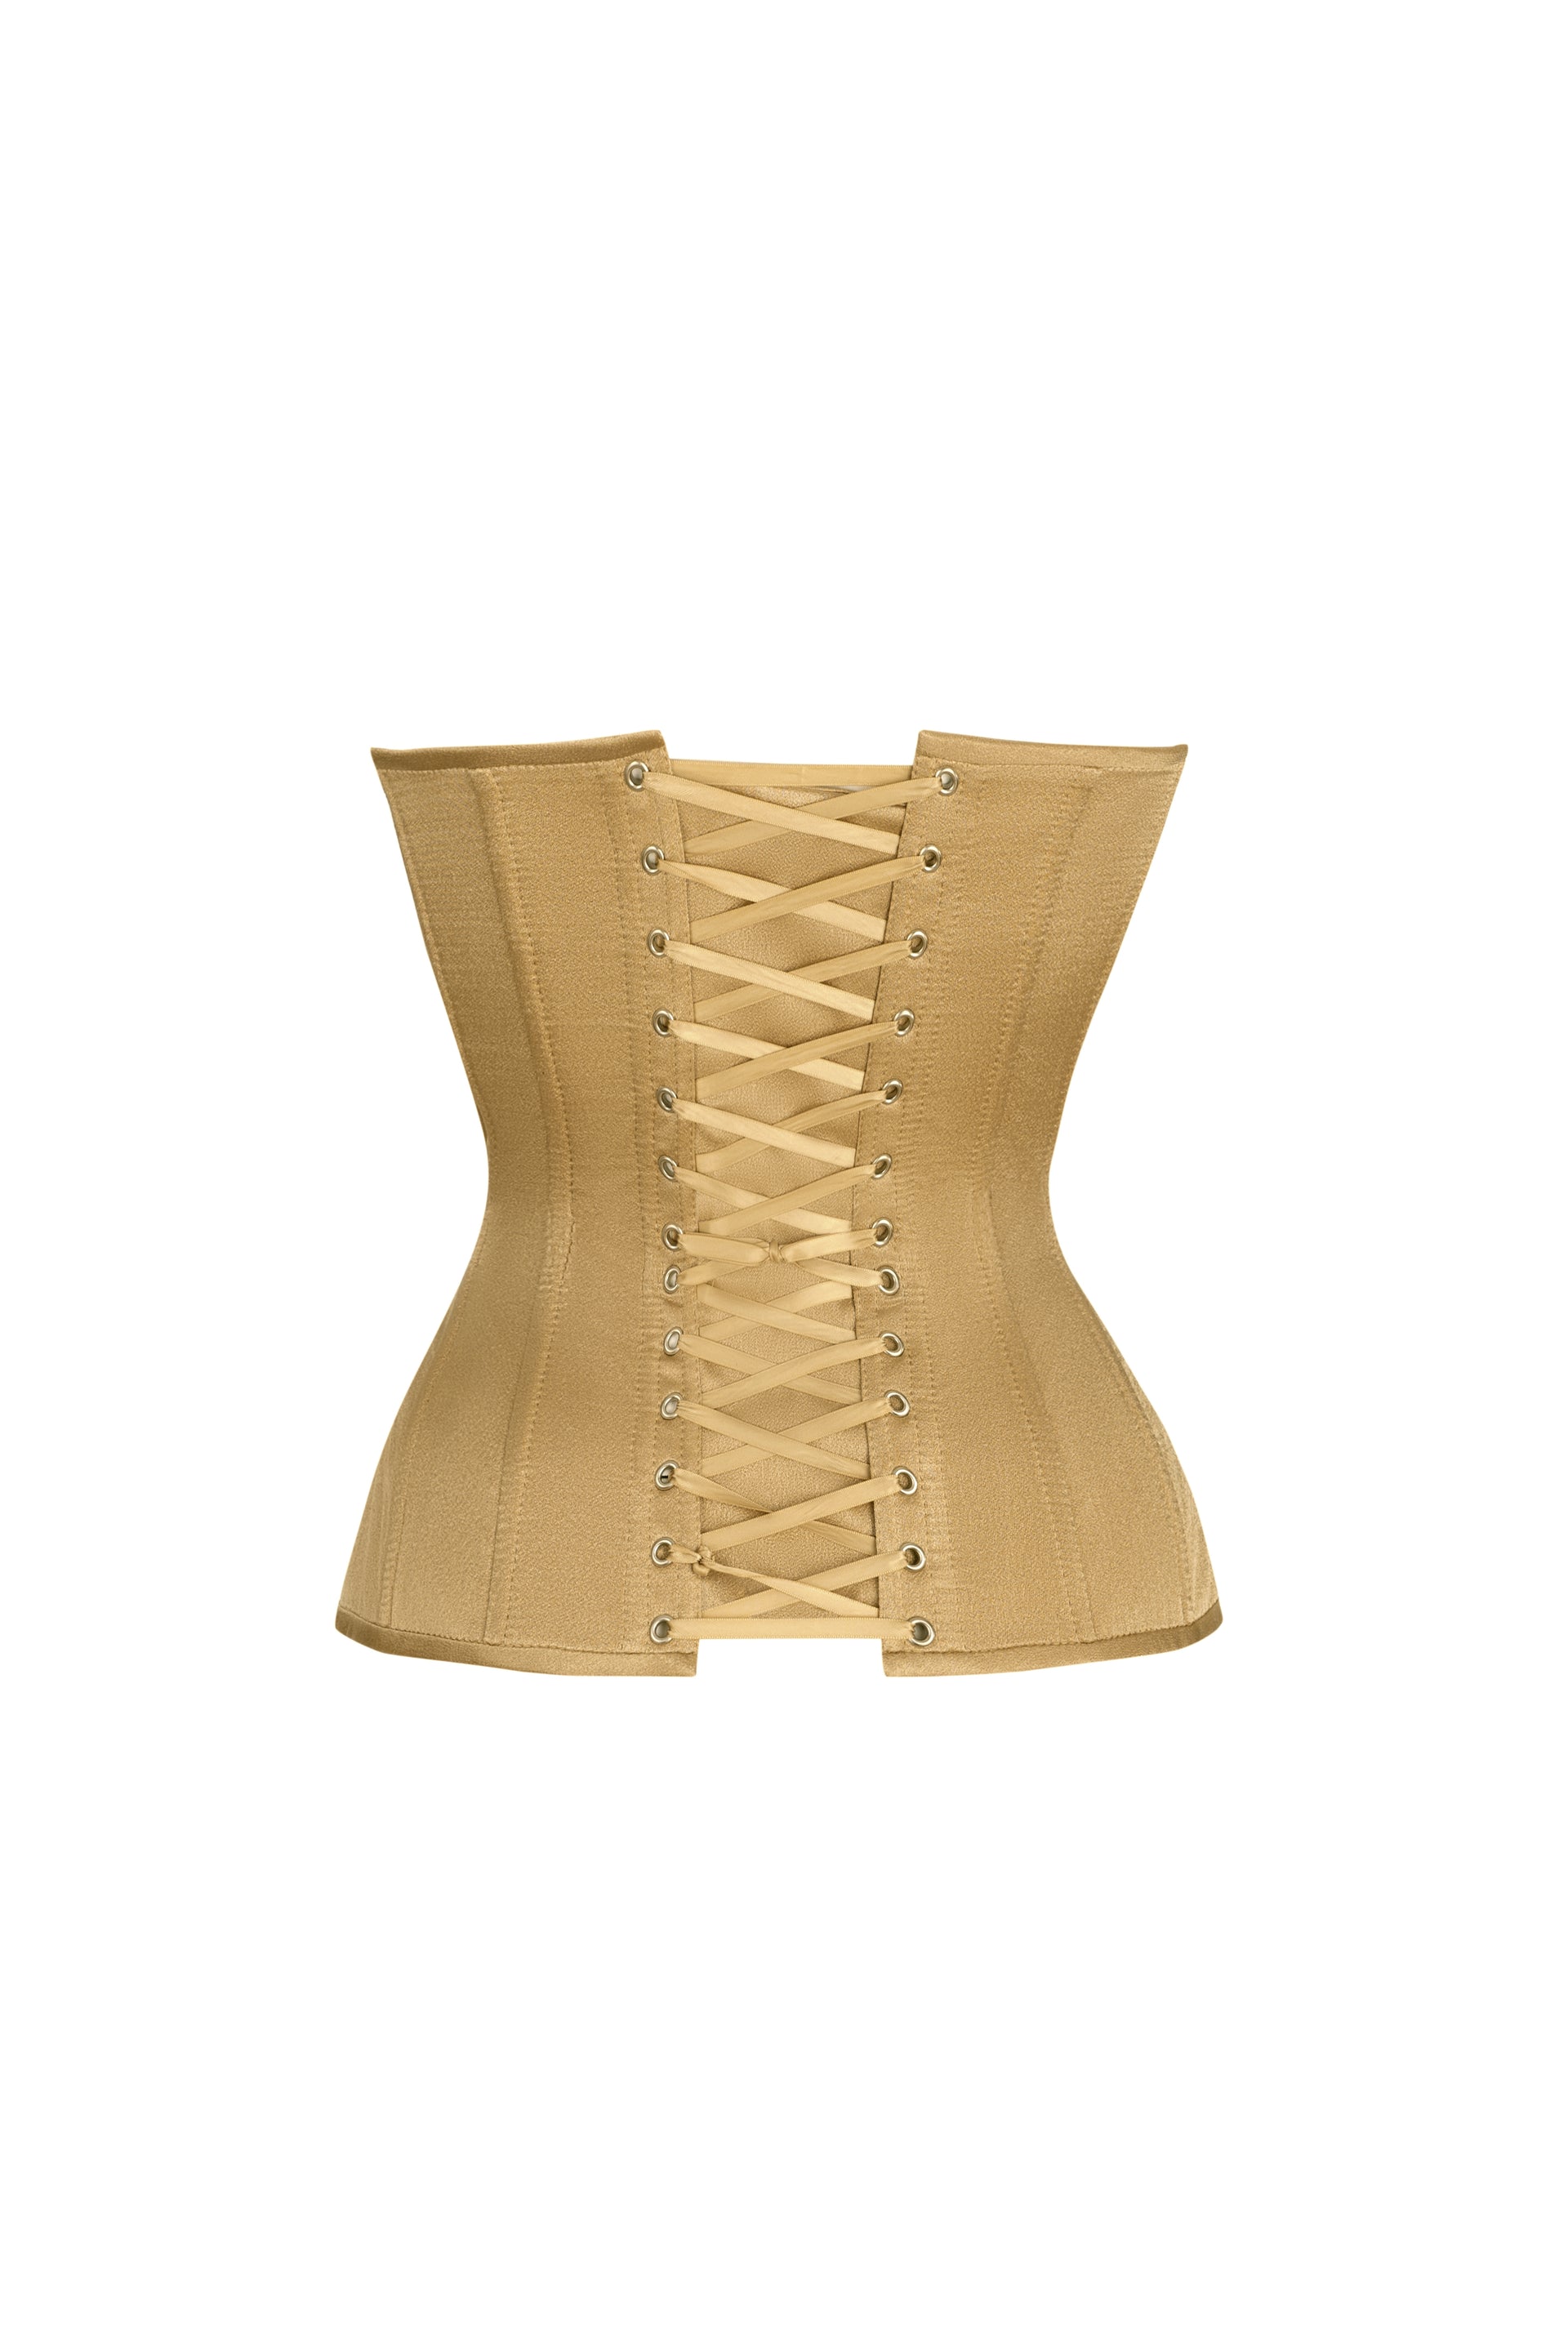 Gold satin corset with cups